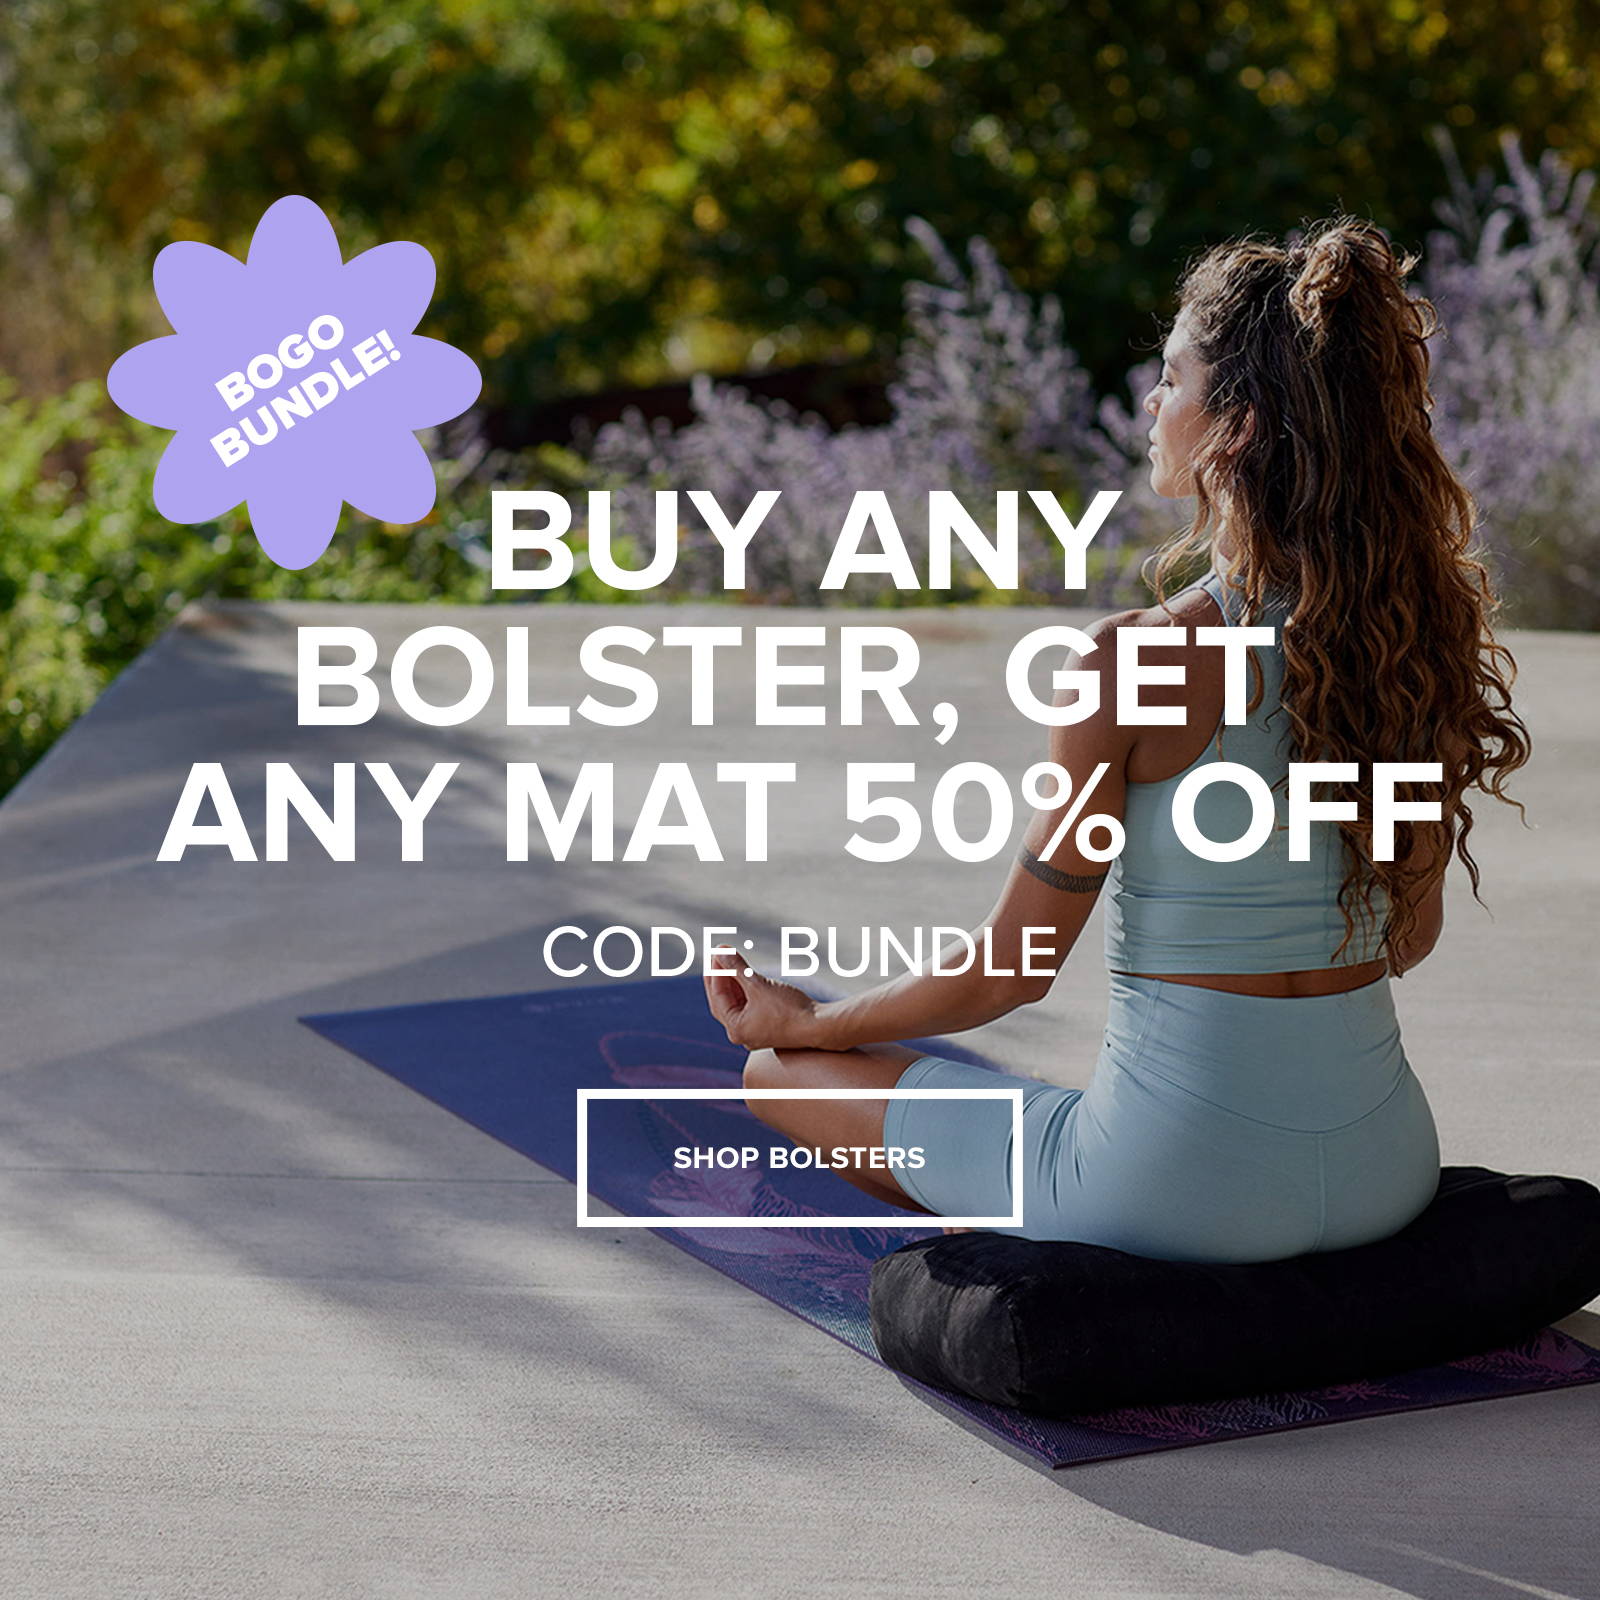 Buy any bolster, get any mat 50% off